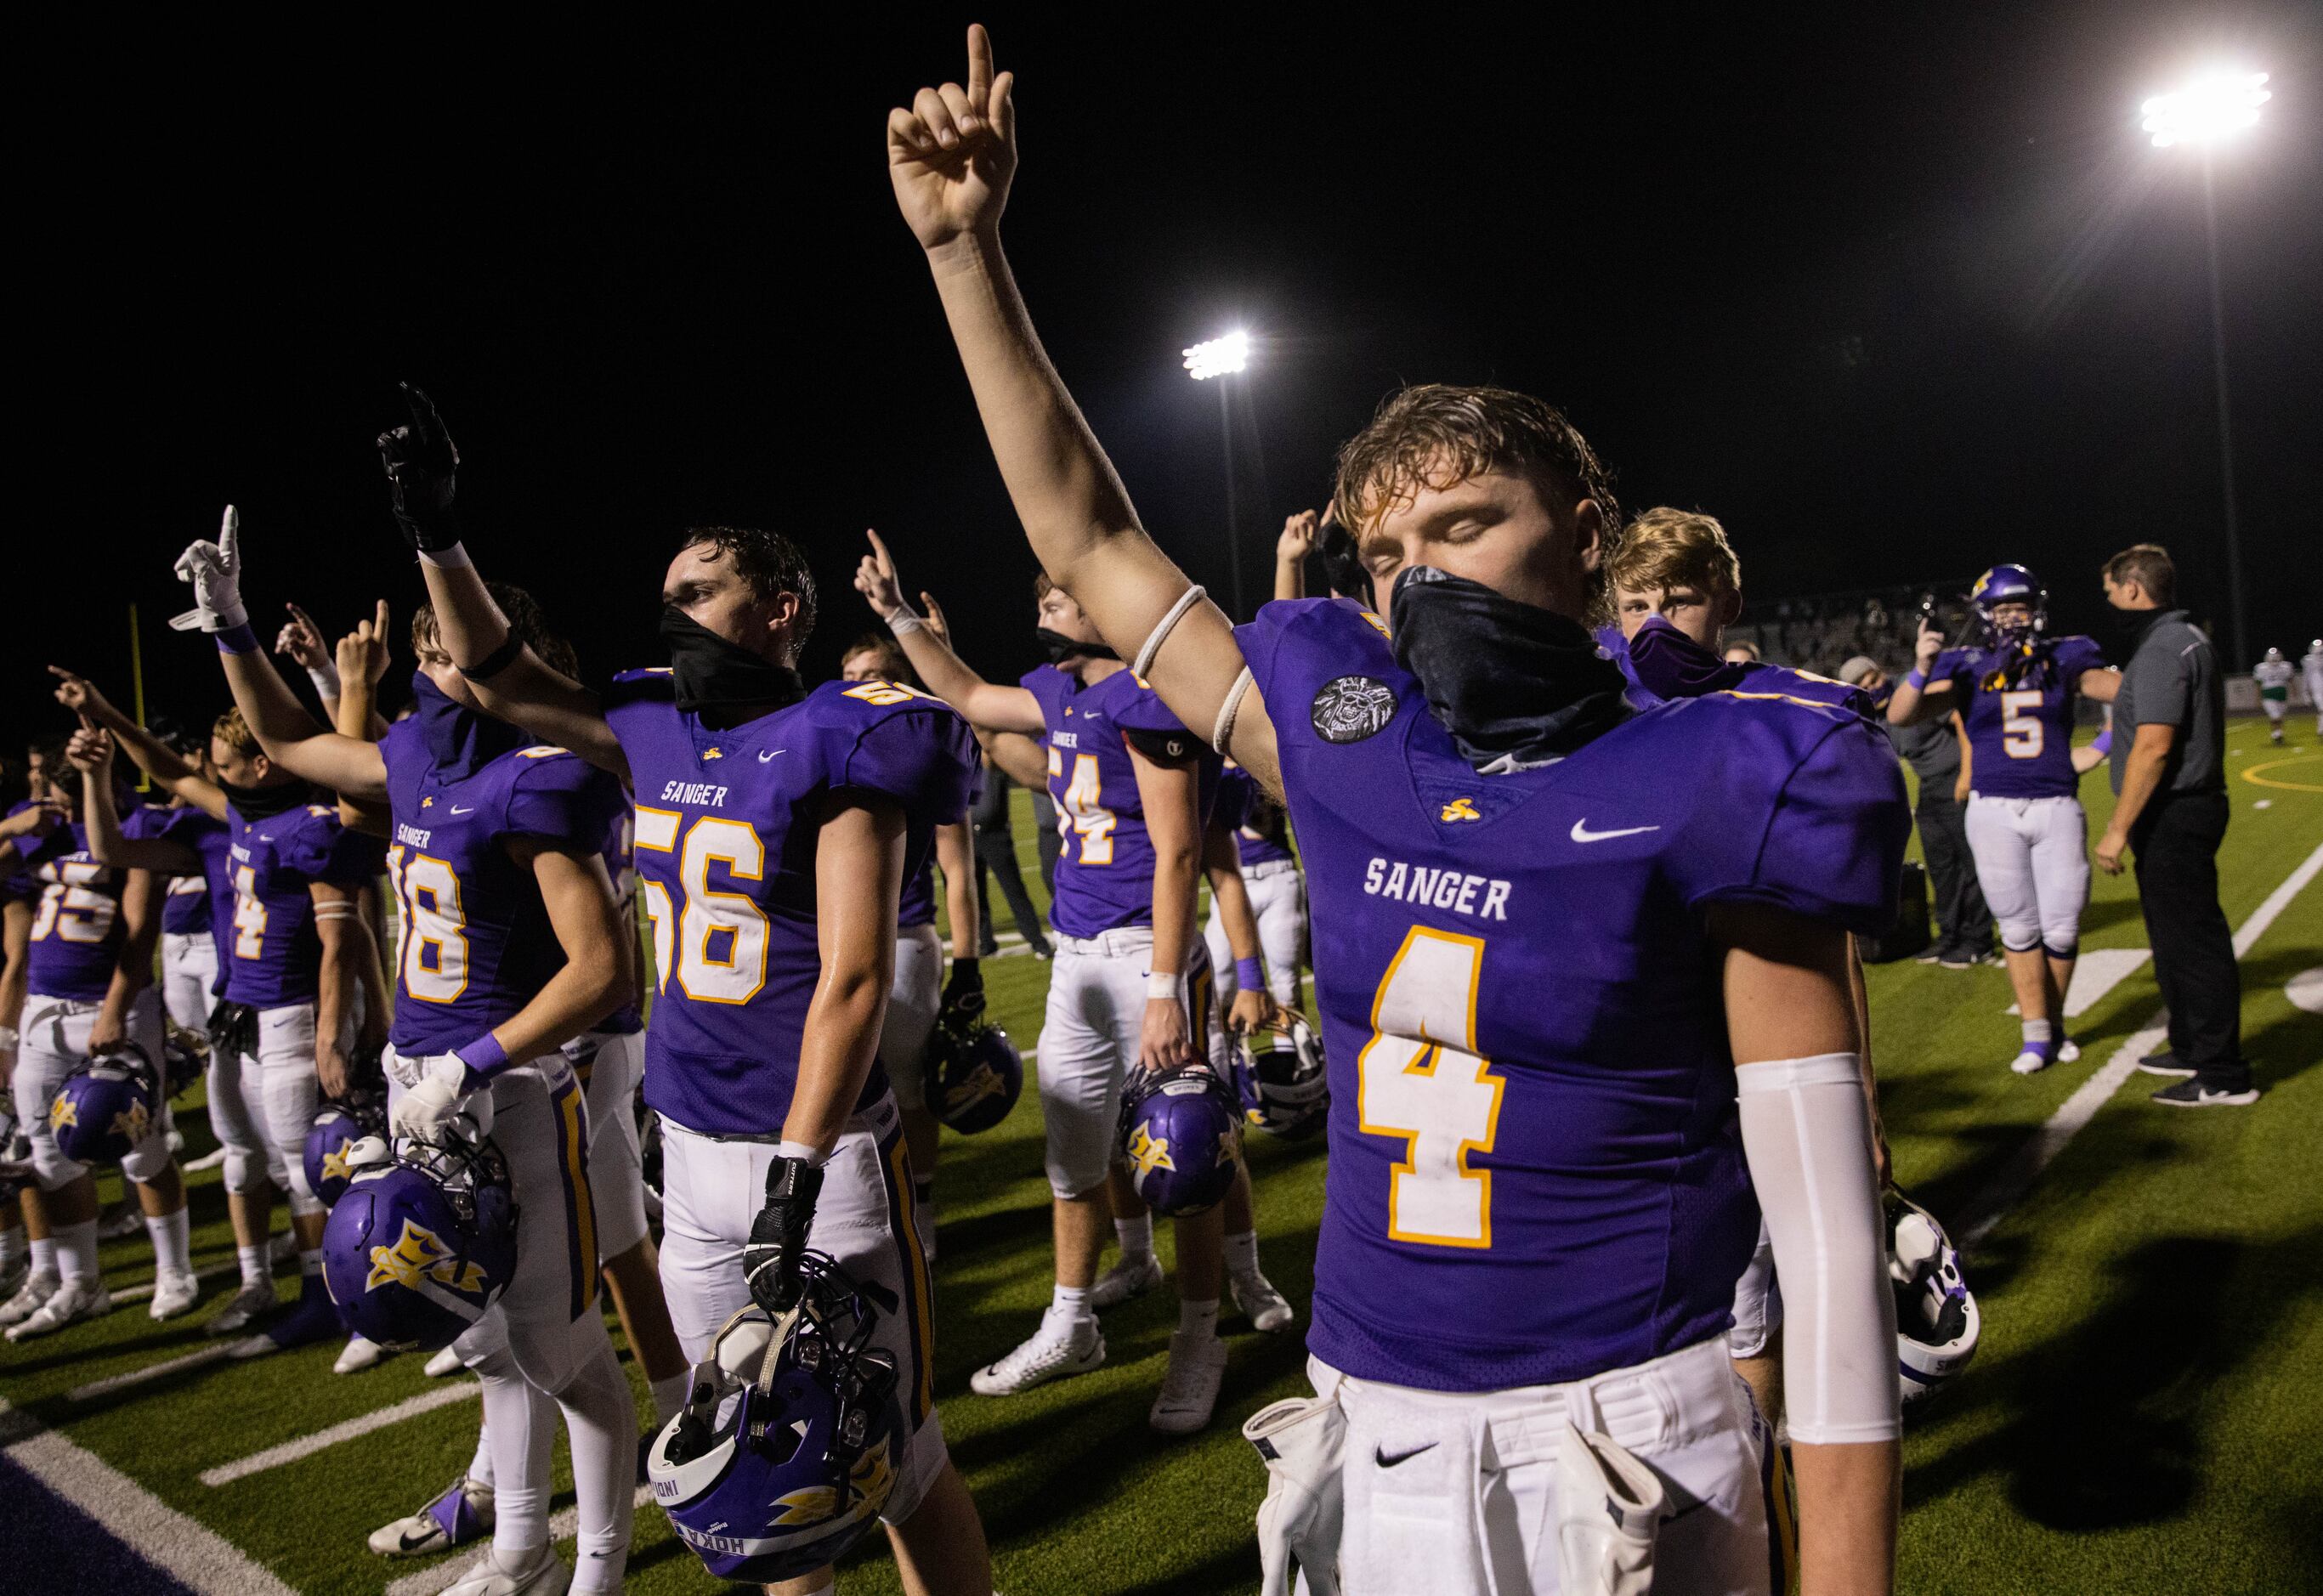 Sanger High School player Avery Walker (4) celebrates with his team after winning against...